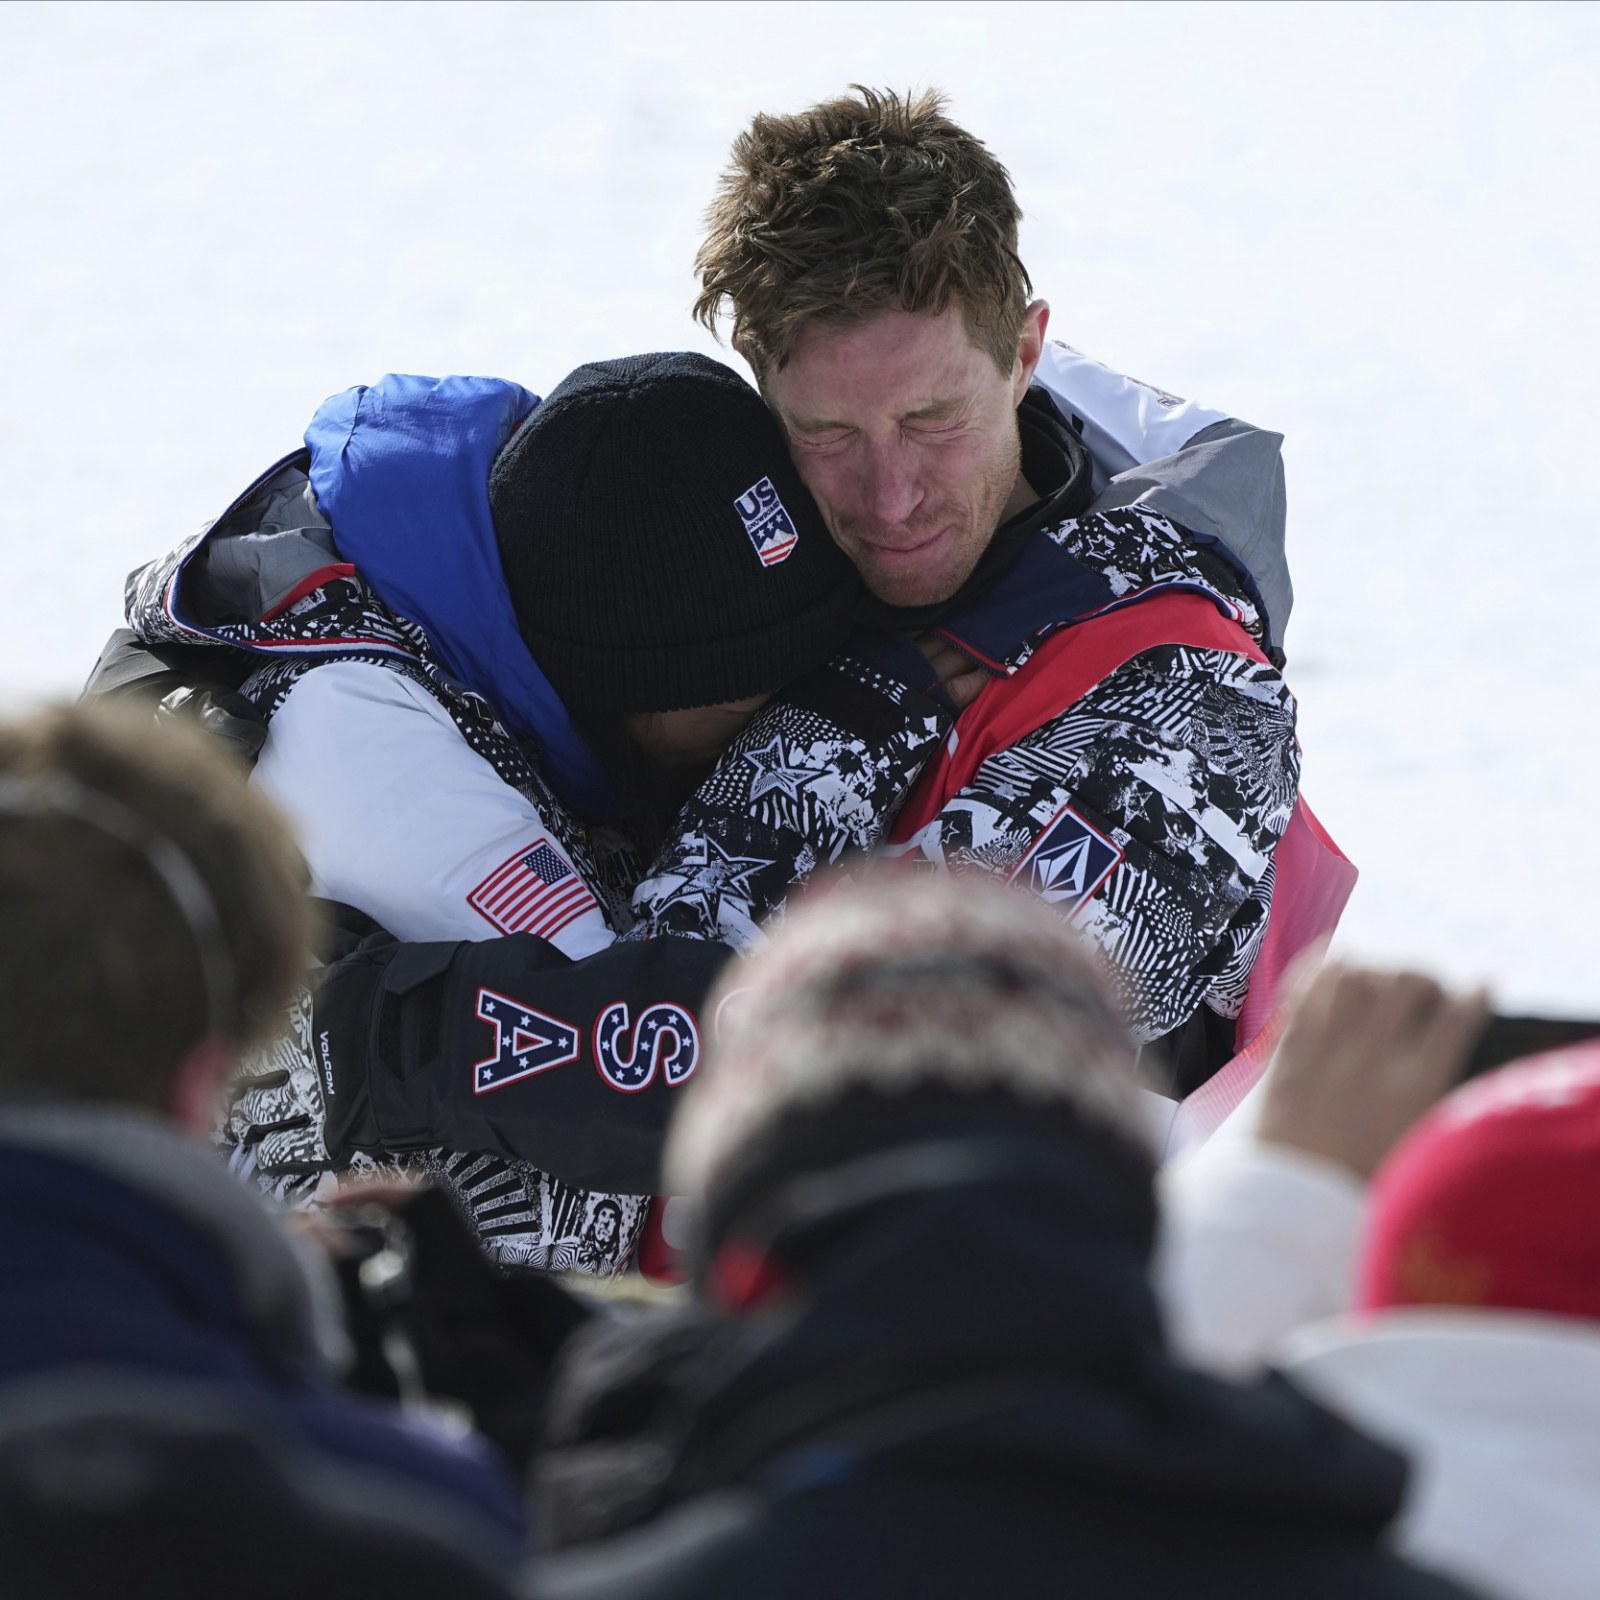 Shaun White Breaks Down in Tears as Olympics Dream Ends Without Gold